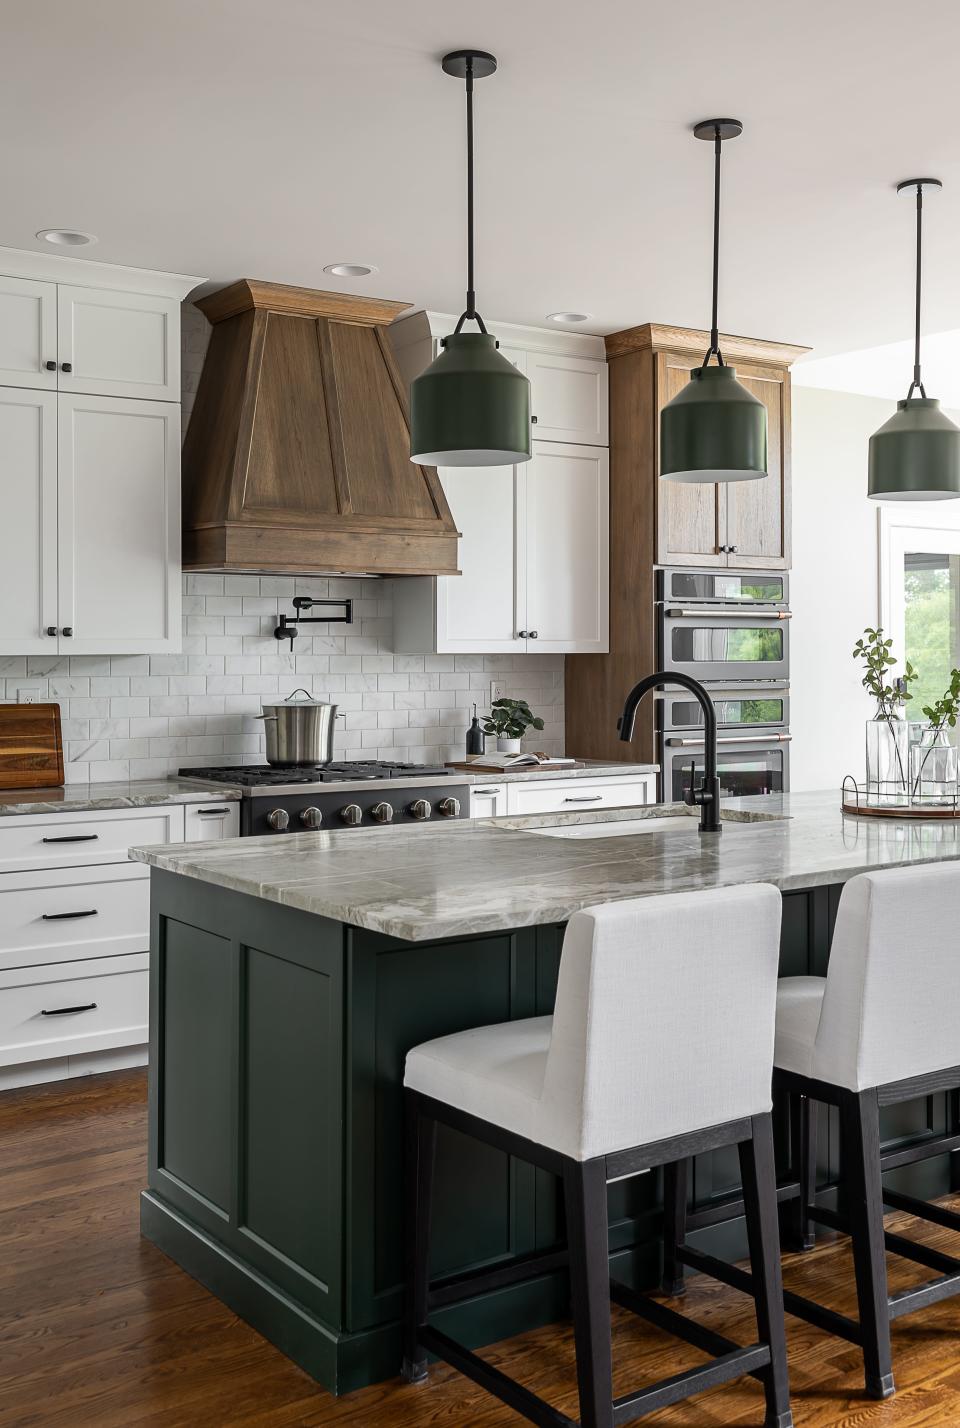 The hunter-green base of this kitchen island matches the pendant lights that hang above in this renovated kitchen in Louisville.